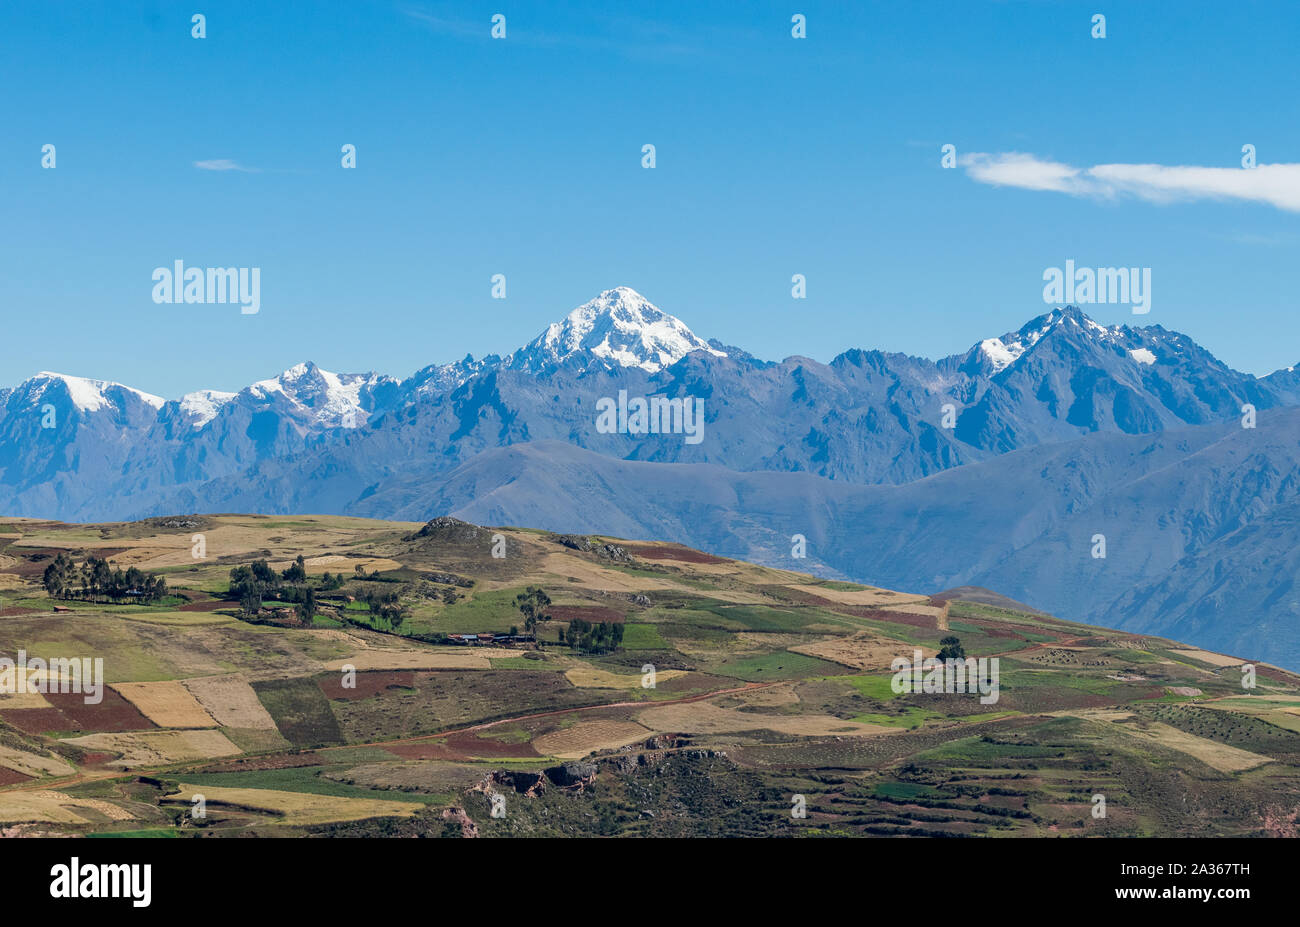 Sacred Valley, Peru - 05/21/2019: The inescapable snow peaked Andes in the Sacred Valley of Peru. Stock Photo